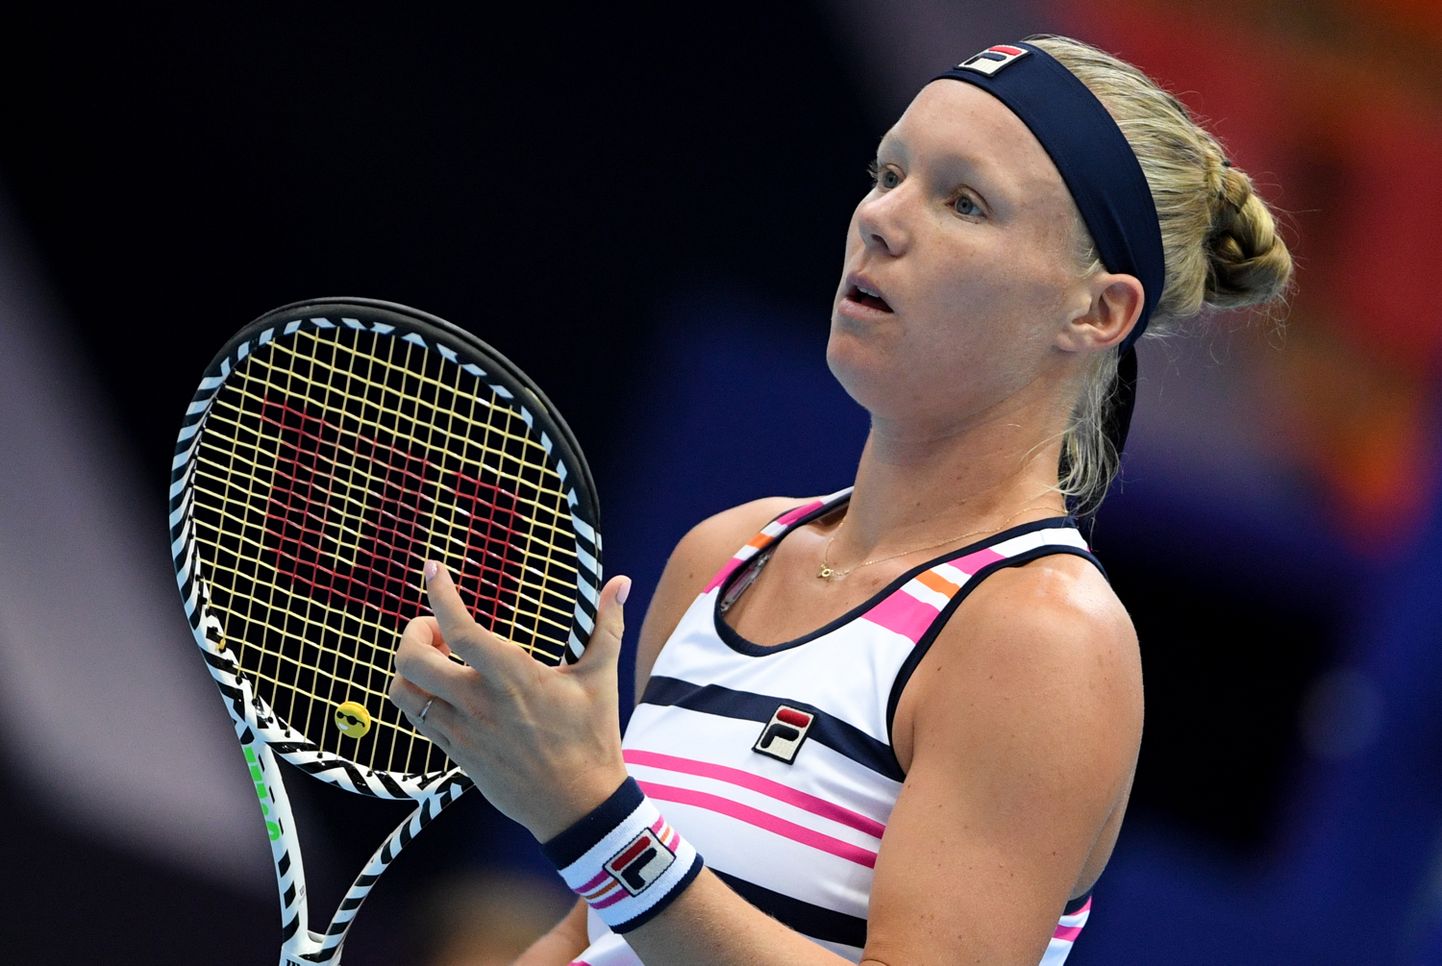 6046856 18.10.2019 Kiki Bertens, of the Netherlands, reacts during the women's singles quaterfinal tennis match against France's Kristina Mladenovic at the Kremlin Cup, in Moscow, Russia. Alexey Filippov / Sputnik